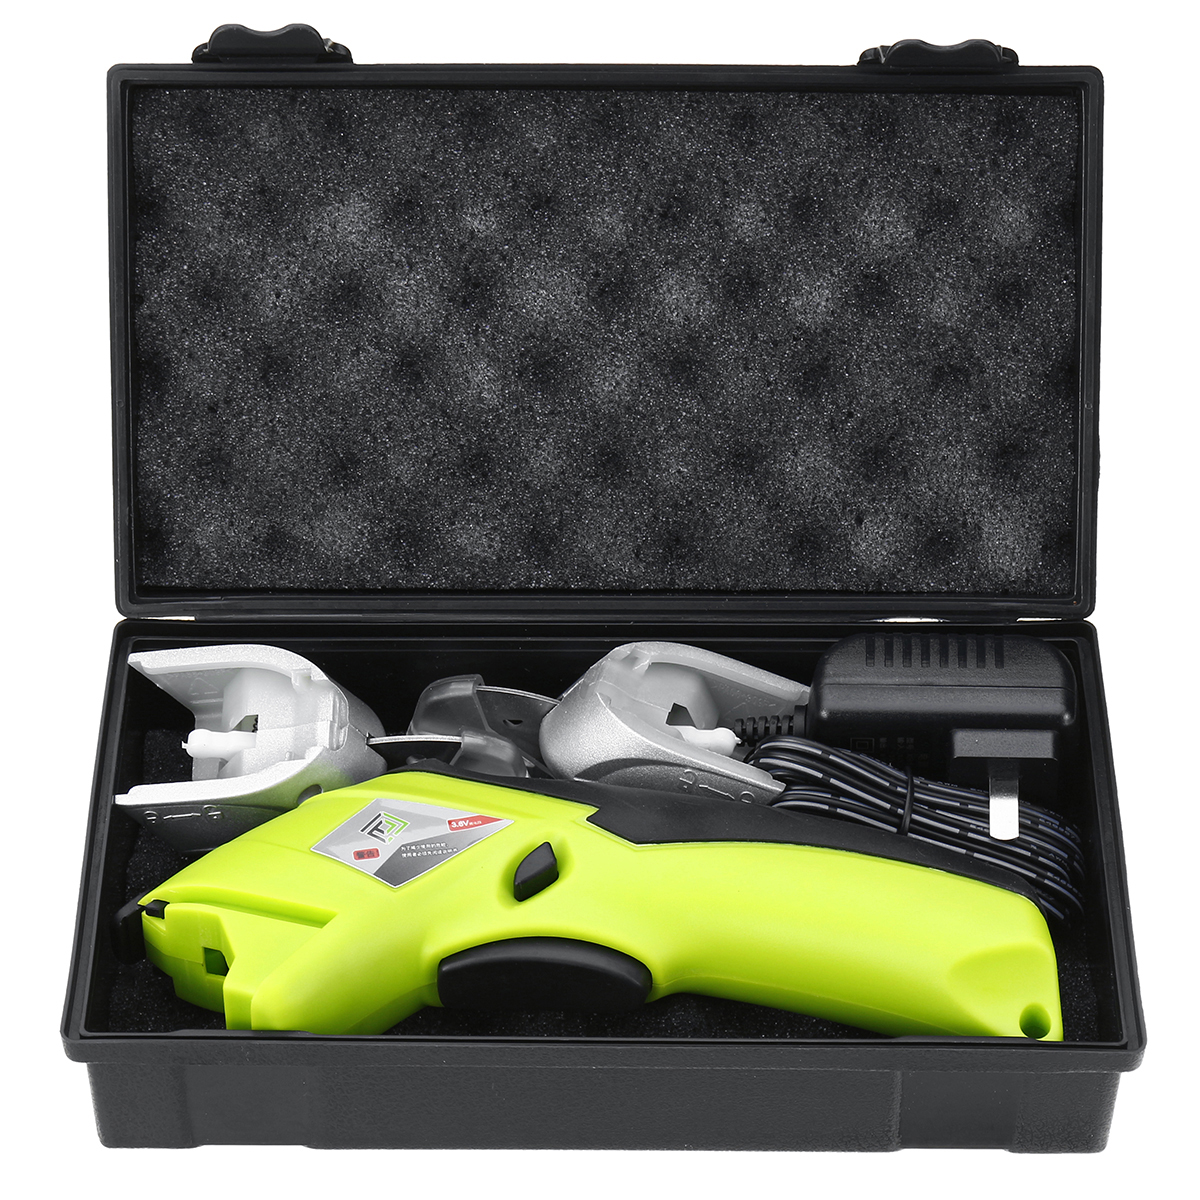 Multipurpose-110V-220V-Electric-Scissors-Cordless-Chargeable-Fabric-Sewing-Scissors-Handheld-1280518-10